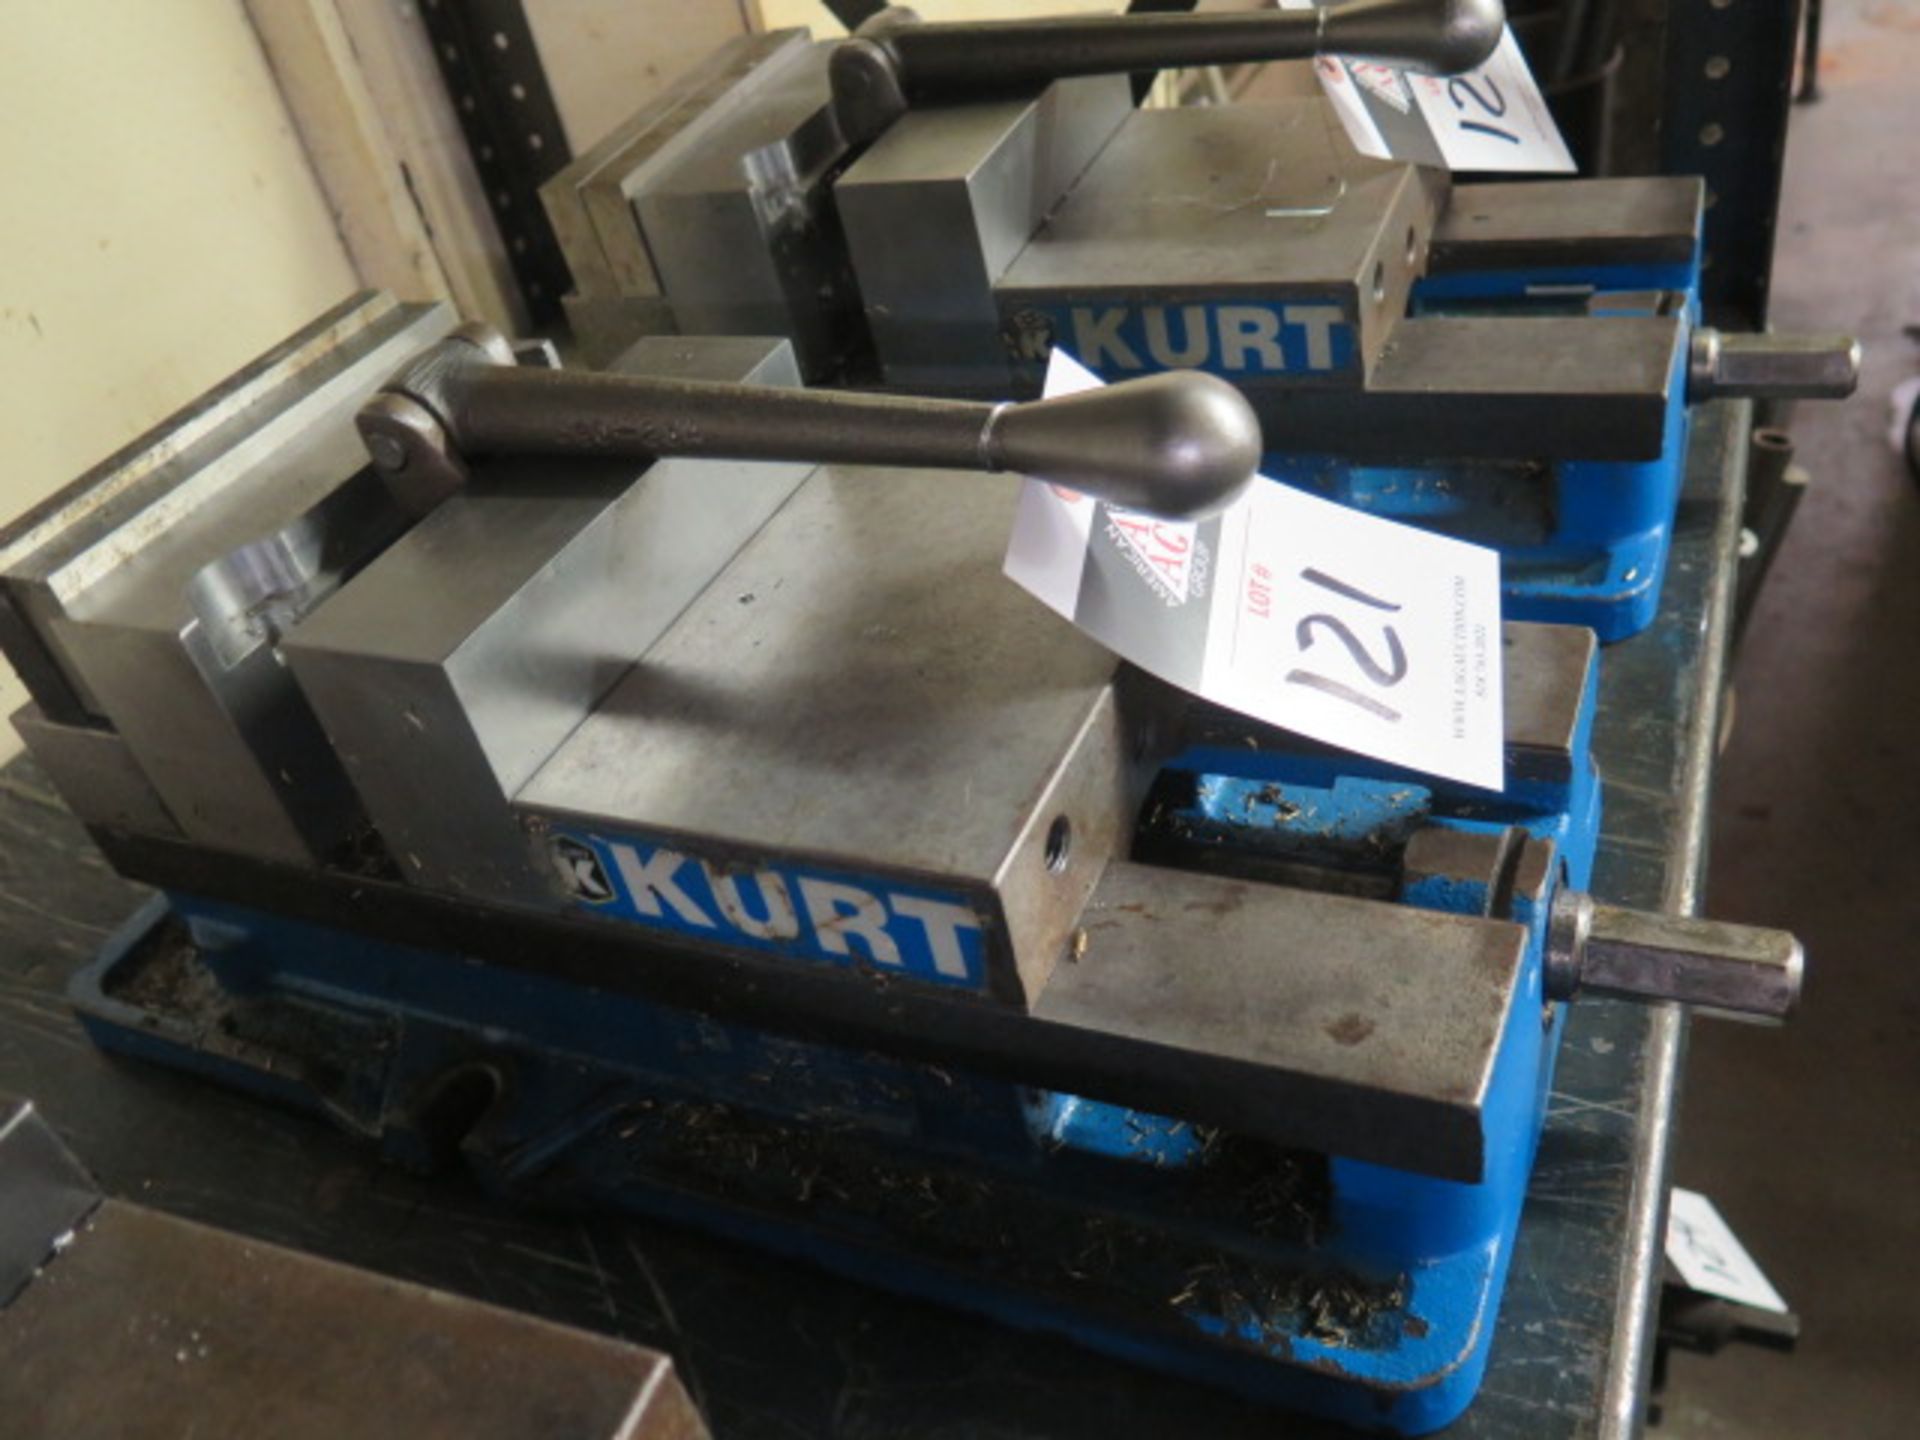 Kurt D675 6" Angle-Lock Vise (SOLD AS-IS - NO WARRANTY) - Image 2 of 2